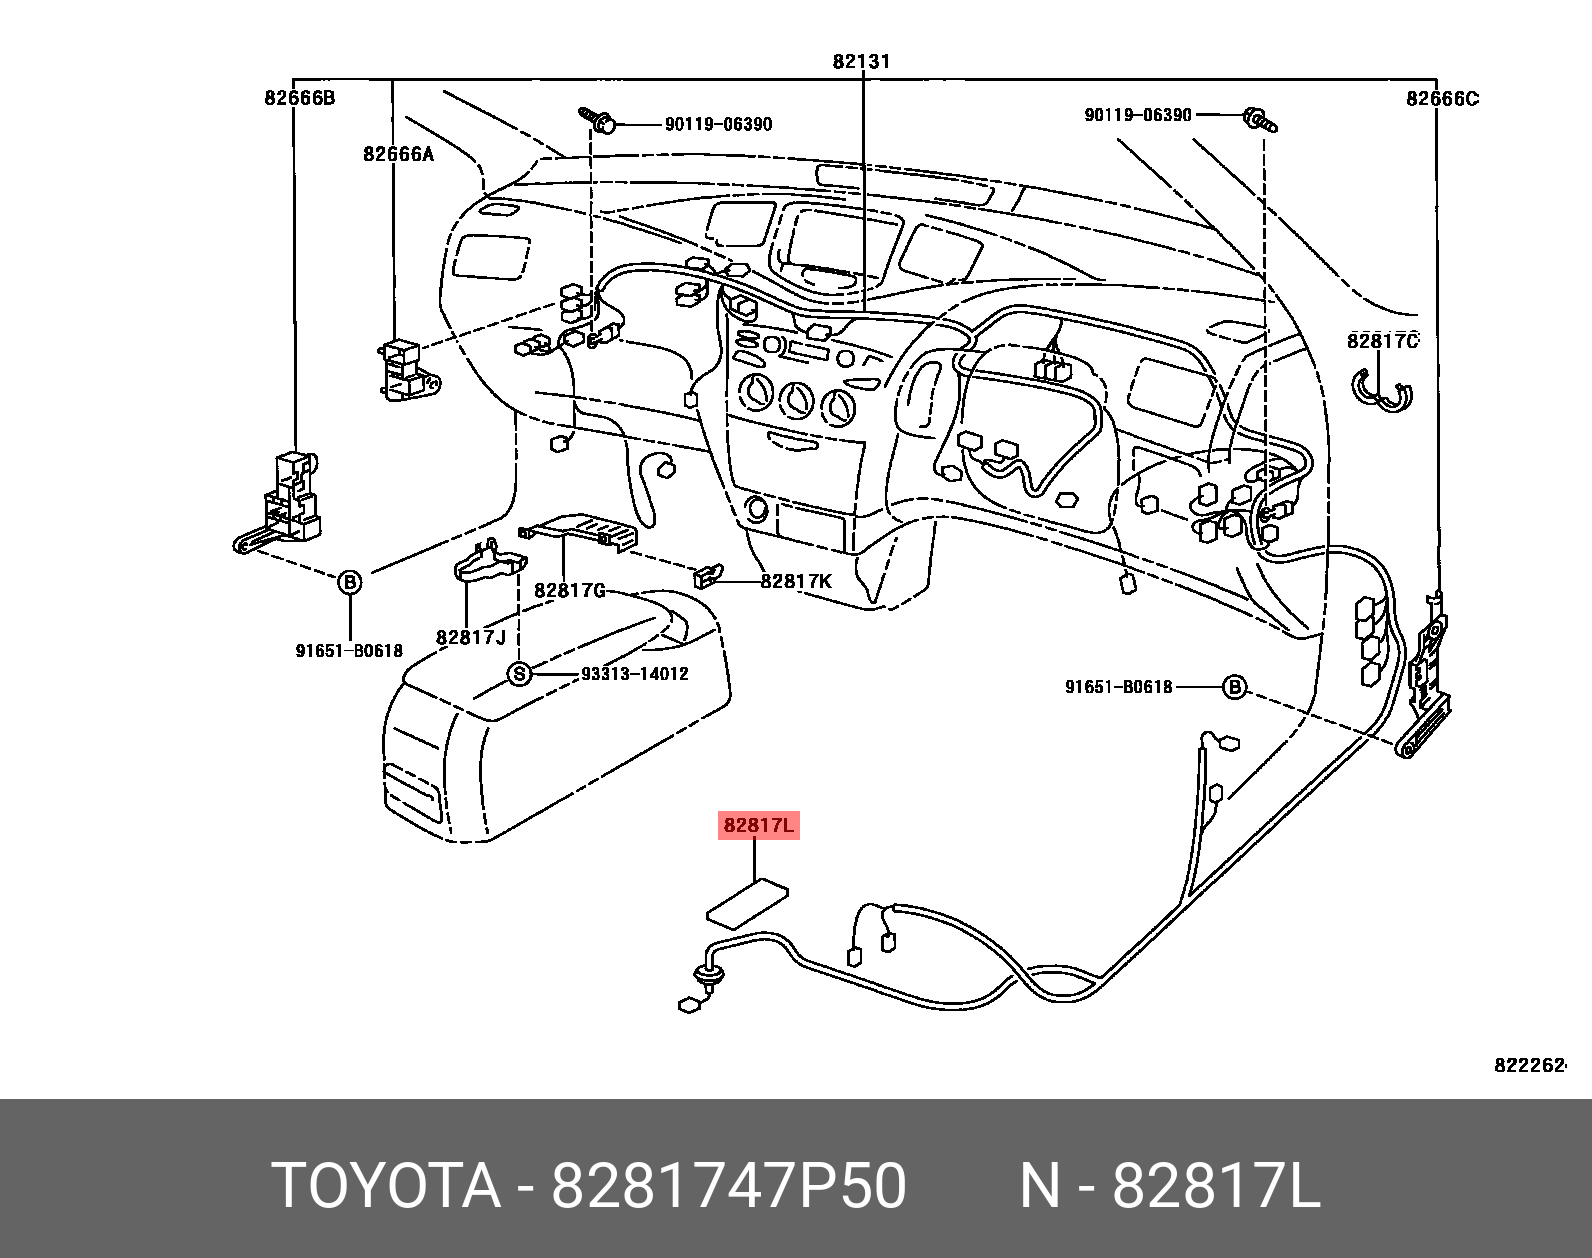 PRIUS 201511 -, PROTECTOR, WIRING HARNESS, NO.7